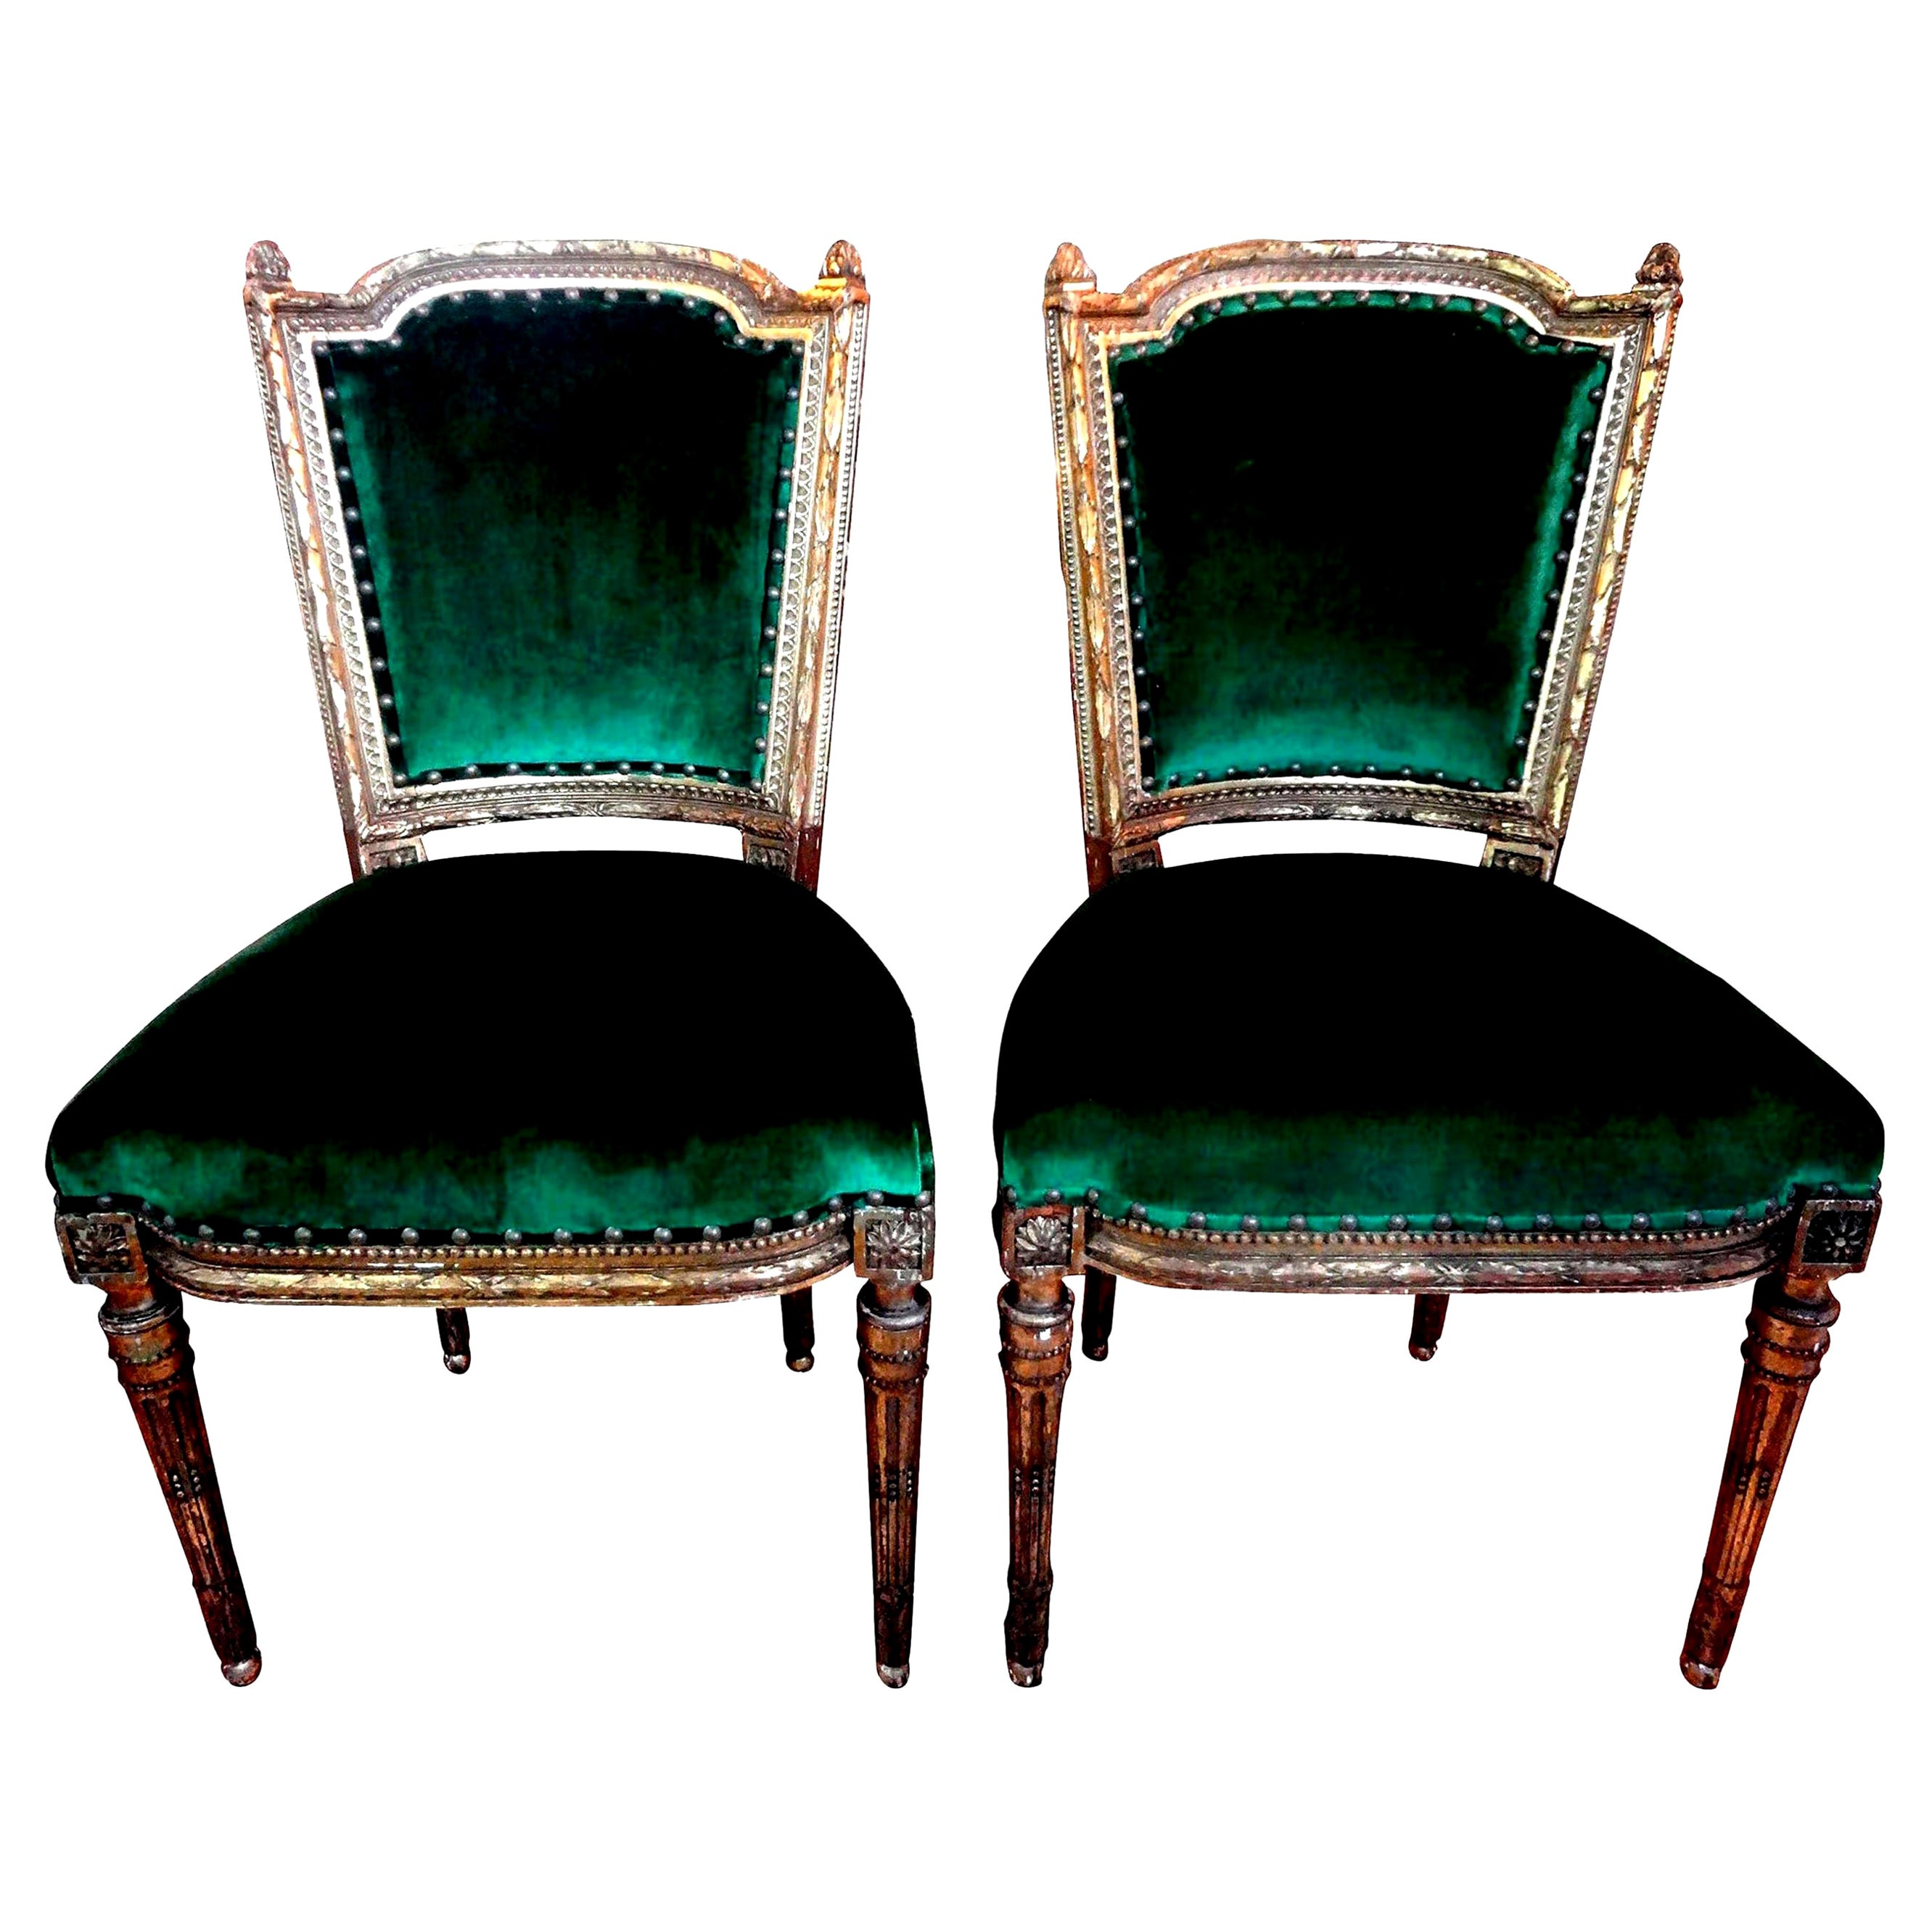 Pair of 19th Century French Louis XVI Style Giltwood Chairs